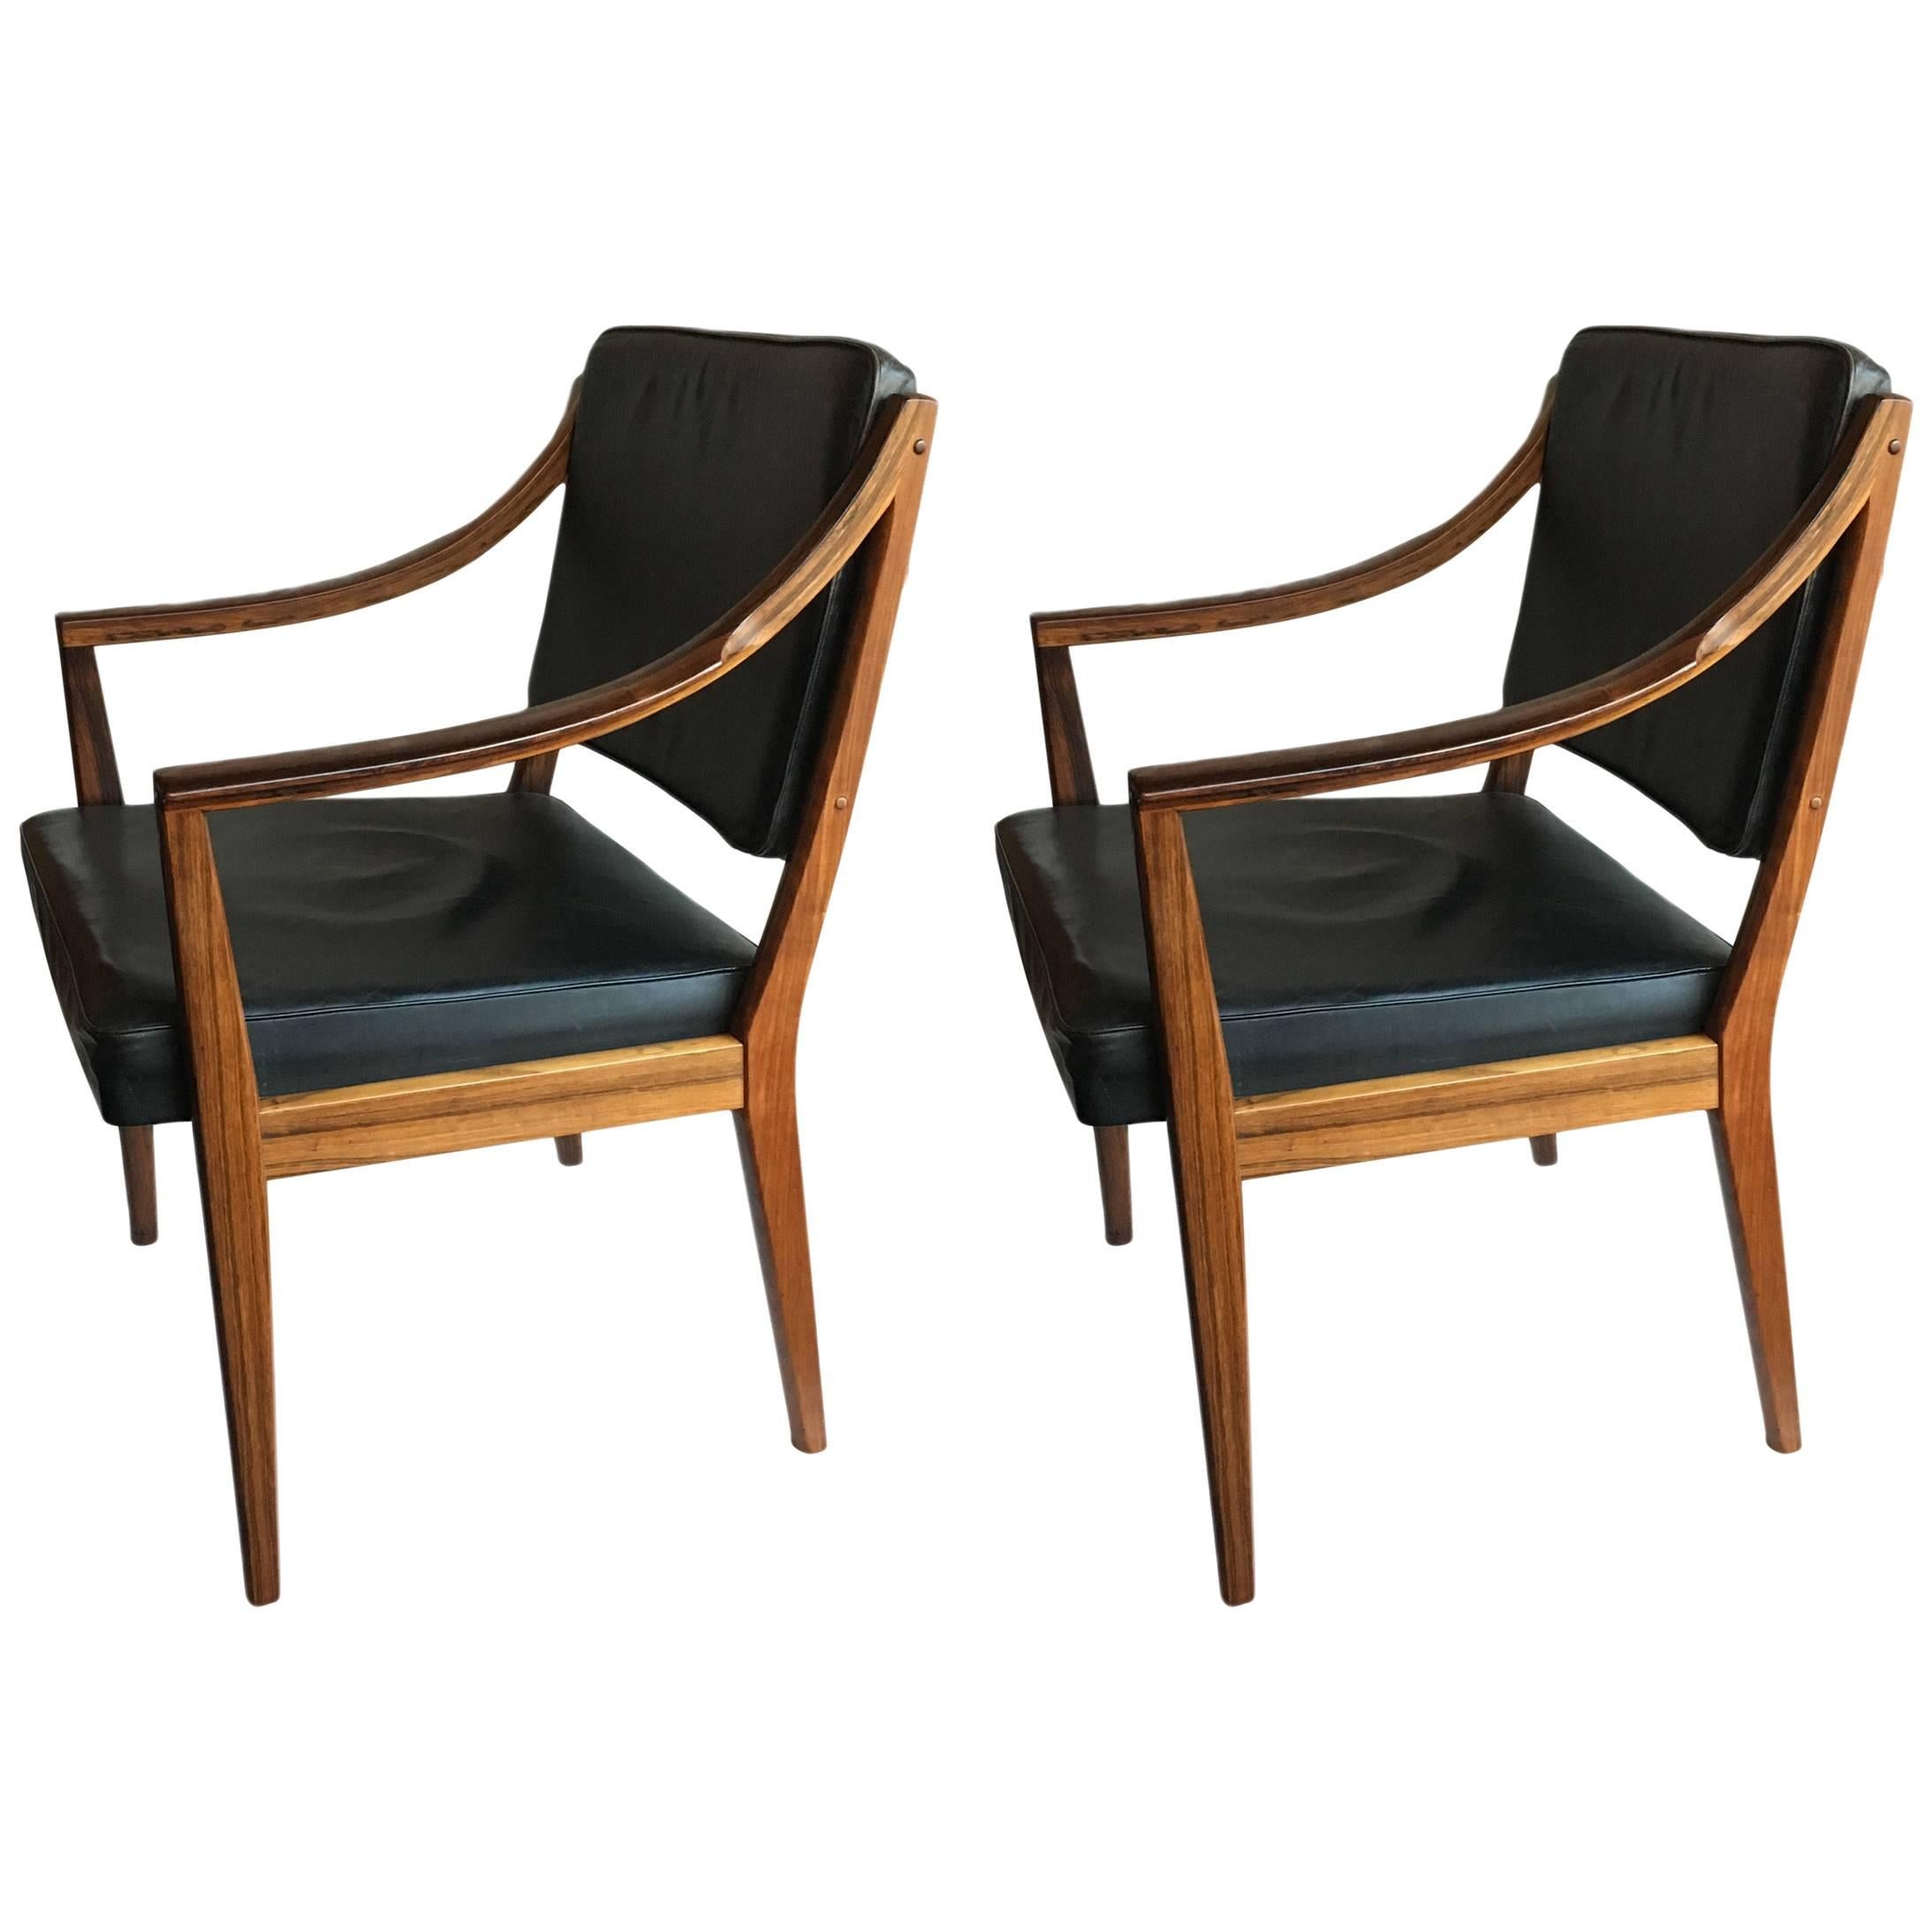 A matching pair of elegant and very unusual Scandinavian Midcentury armchairs. Norwegian in design with beautiful sweeping Santos rosewood arms and original black leather upholstery. The craftsmanship in the build of these chairs is exceptional. We